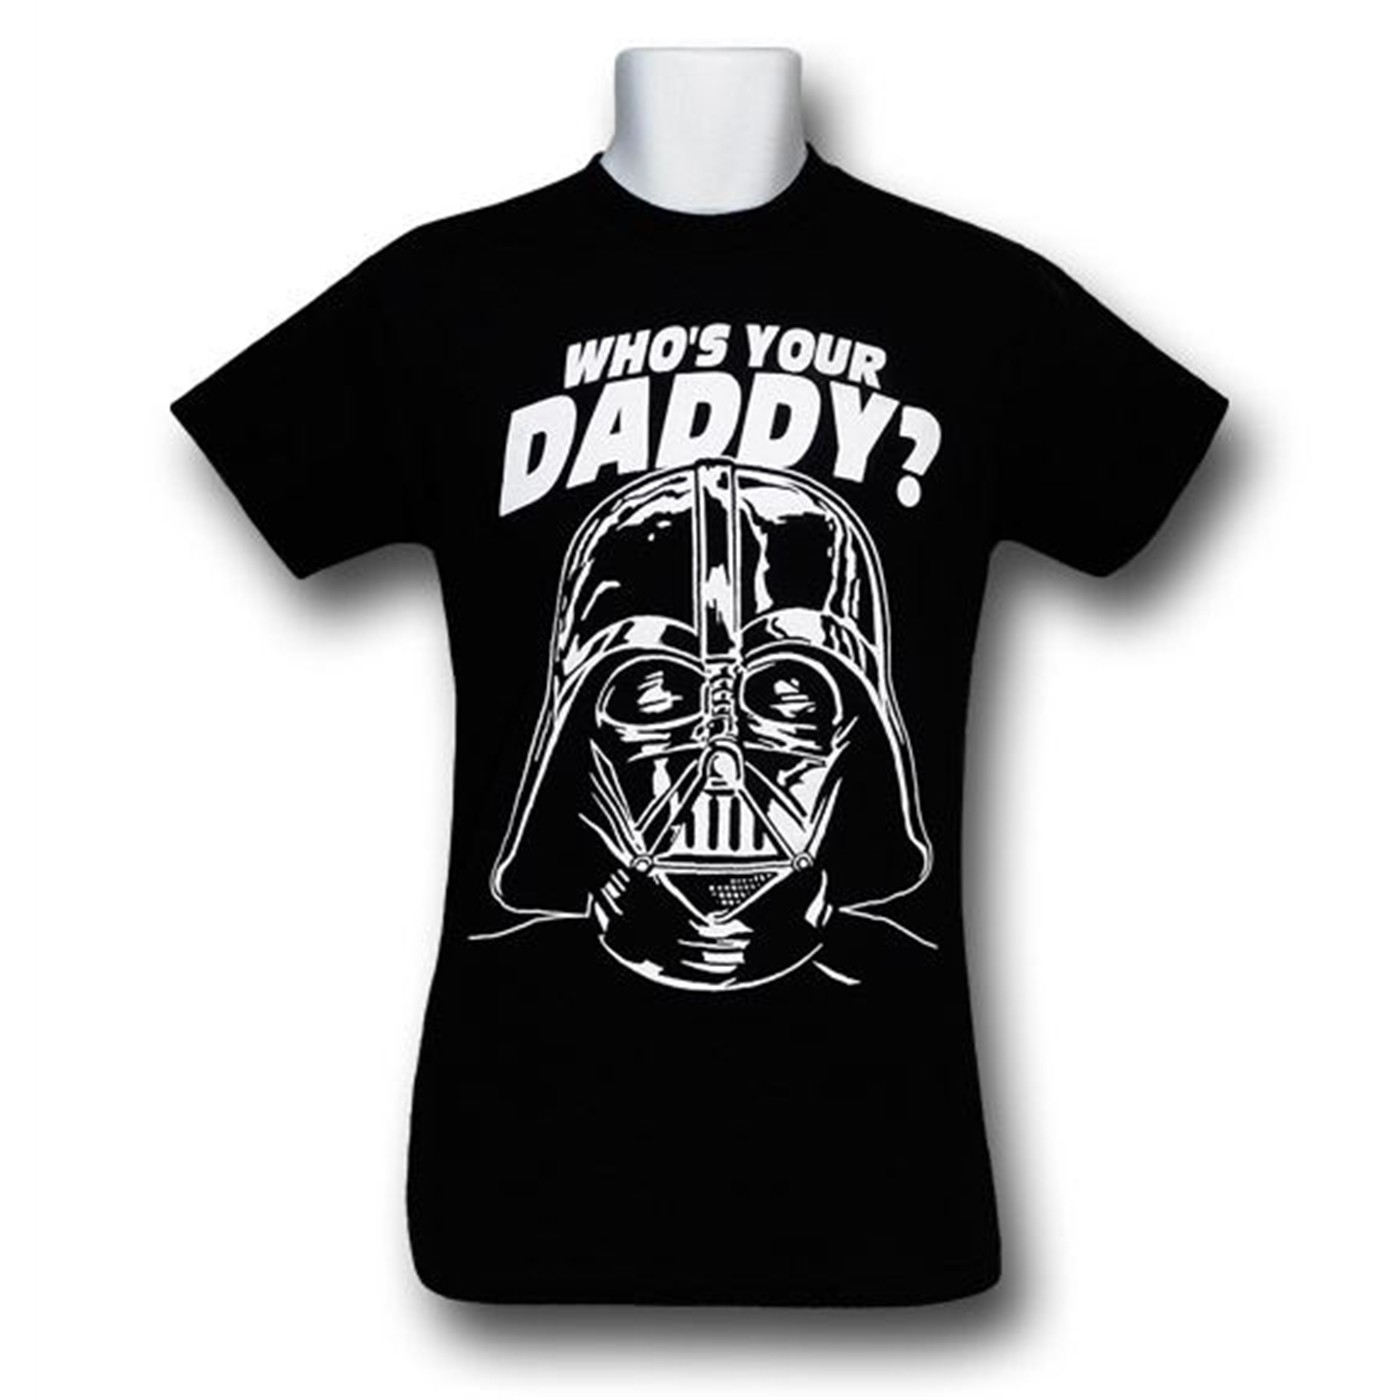 Star Wars Vader 'Who's Your Daddy' T-Shirt